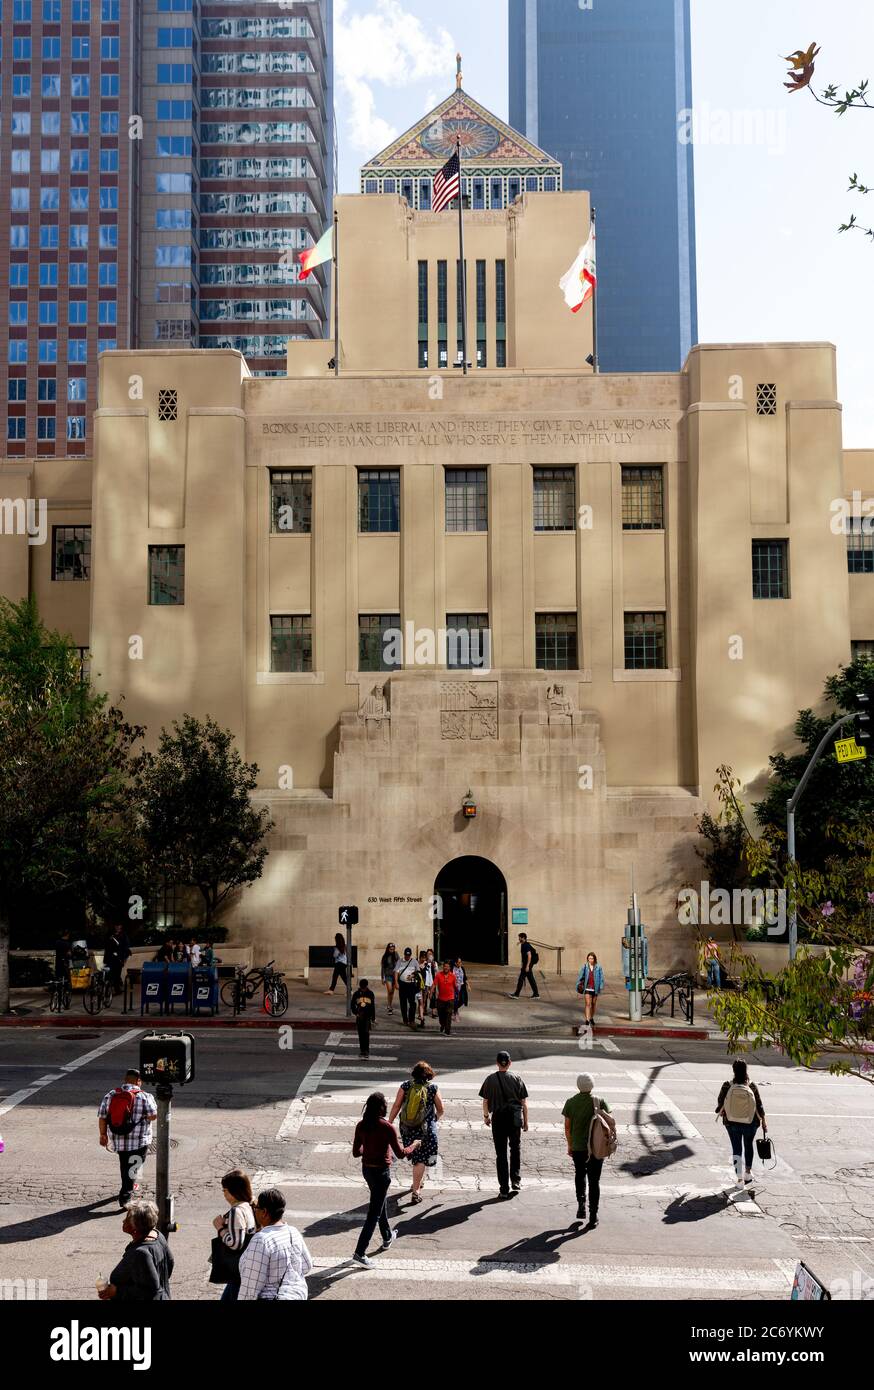 Exterior Northwest facade of the Los Angeles Central Public Library, showing entrance on 5th Street. Stock Photo